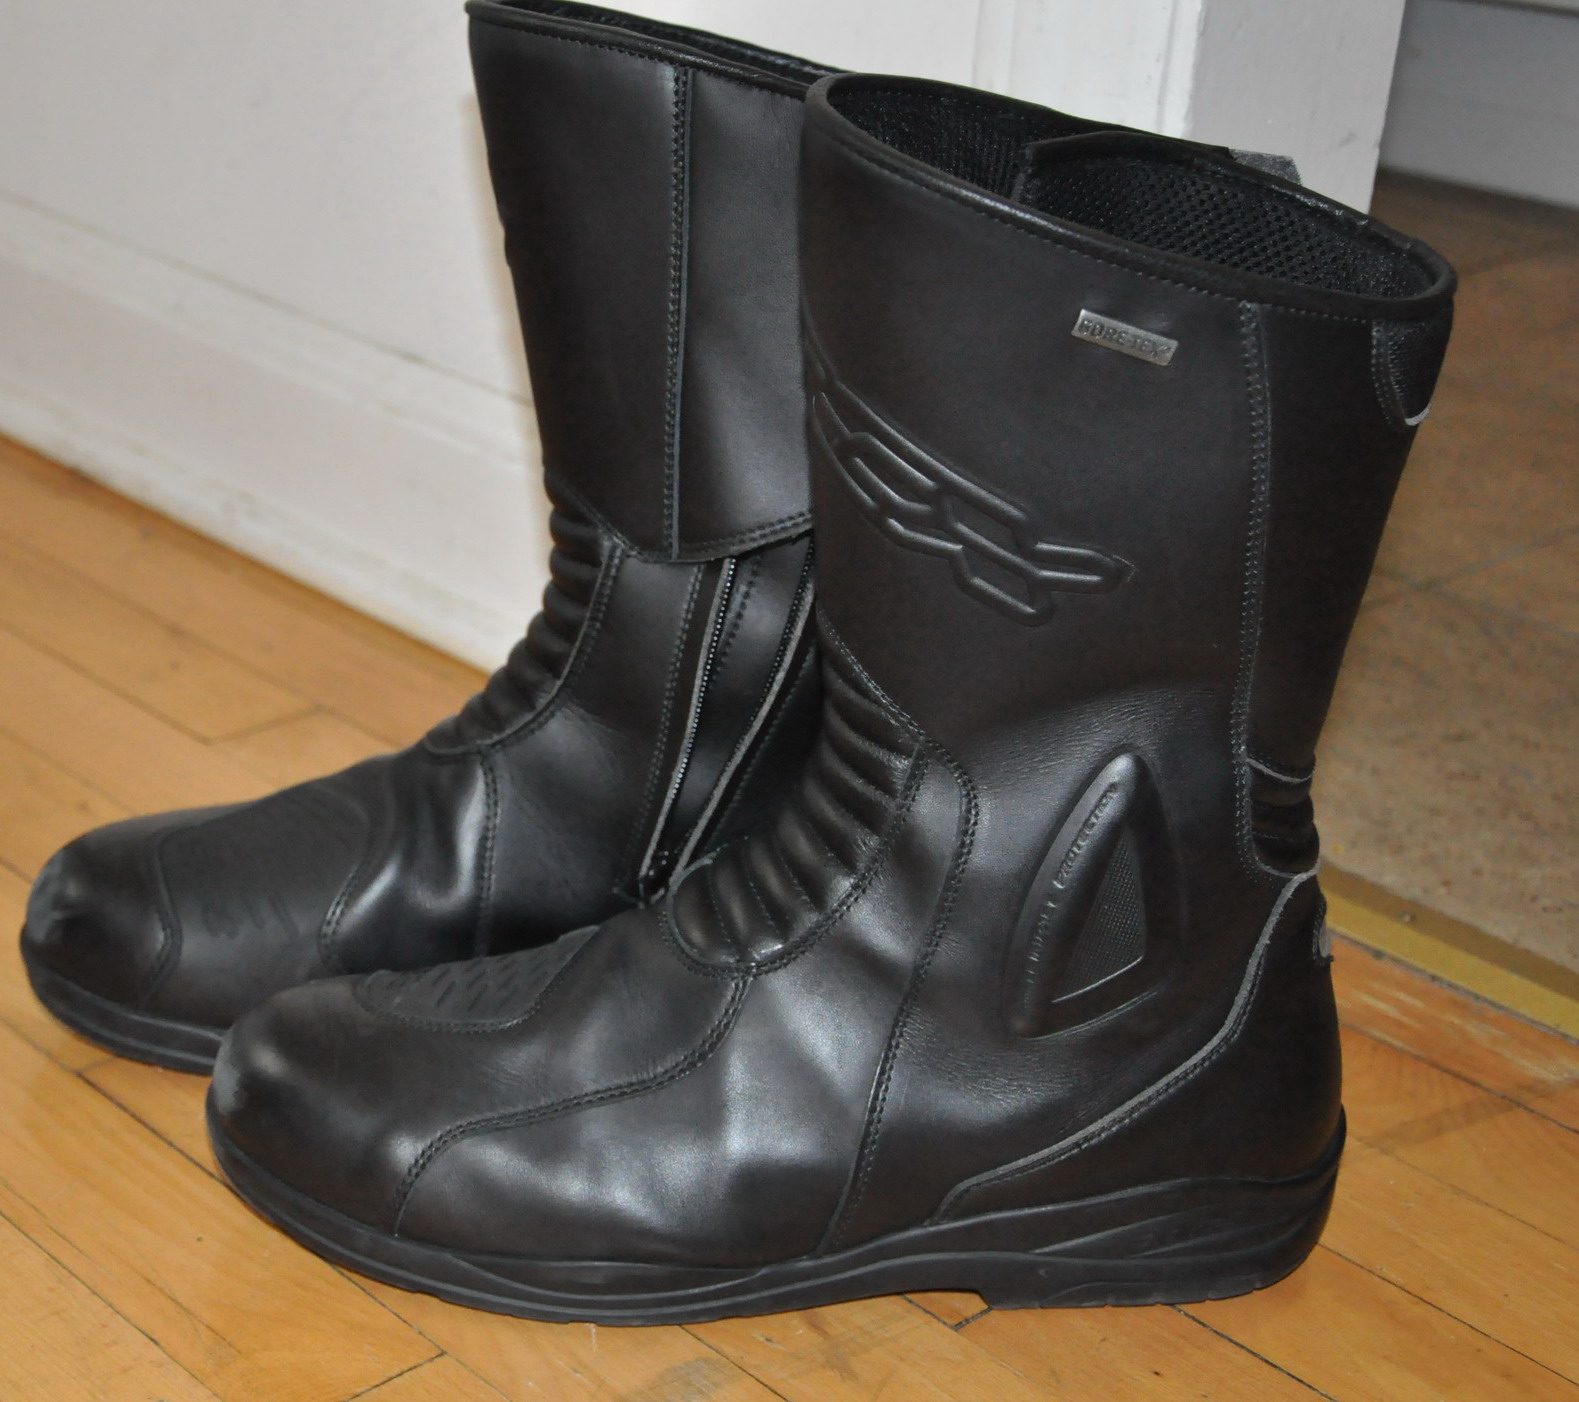 Great motorcycle boots: TCX X-Five Plus | Wisdom and Wonder